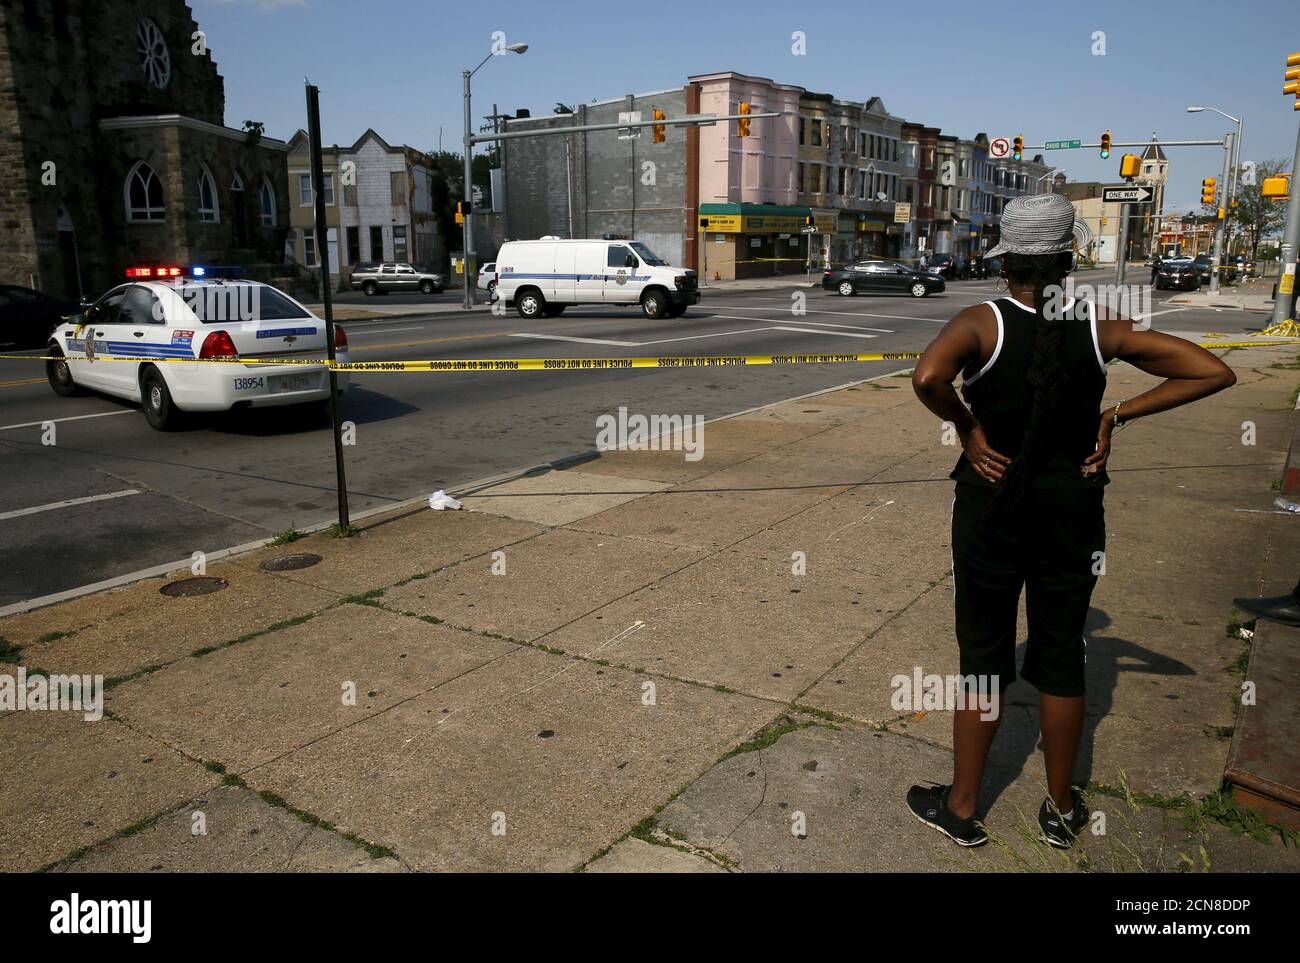 A resident in the neighborhood where Freddie Gray was arrested and where residents rioted over his death in April look on at the scene of a shooting at the intersection of West North Avenue and Druid Hill Avenue in West Baltimore, Maryland May 30, 2015. Local media have reported more than 35 murders in the city of Baltimore since the April rioting over the death of 25-year-old resident Freddie Gray and shootings continue regularly in his West Baltimore neighborhood.  REUTERS/Jim Bourg Stock Photo